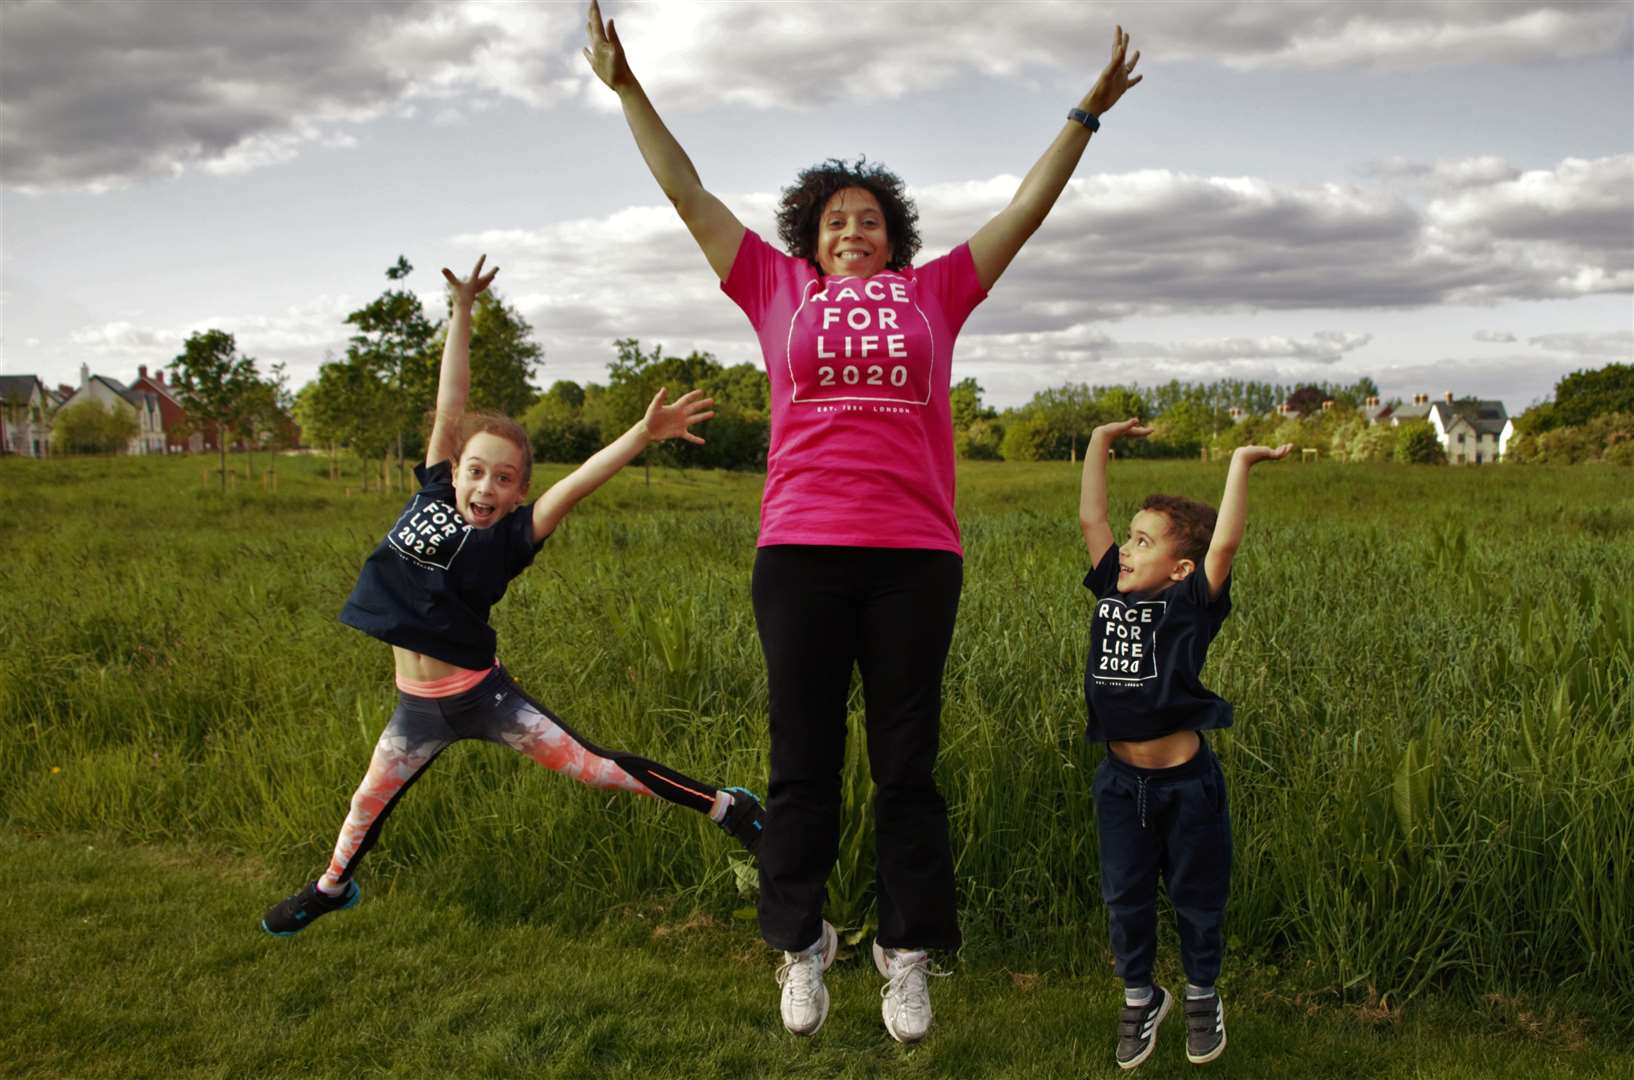 Cancer Research UK has set a new date for Race for Life 2020